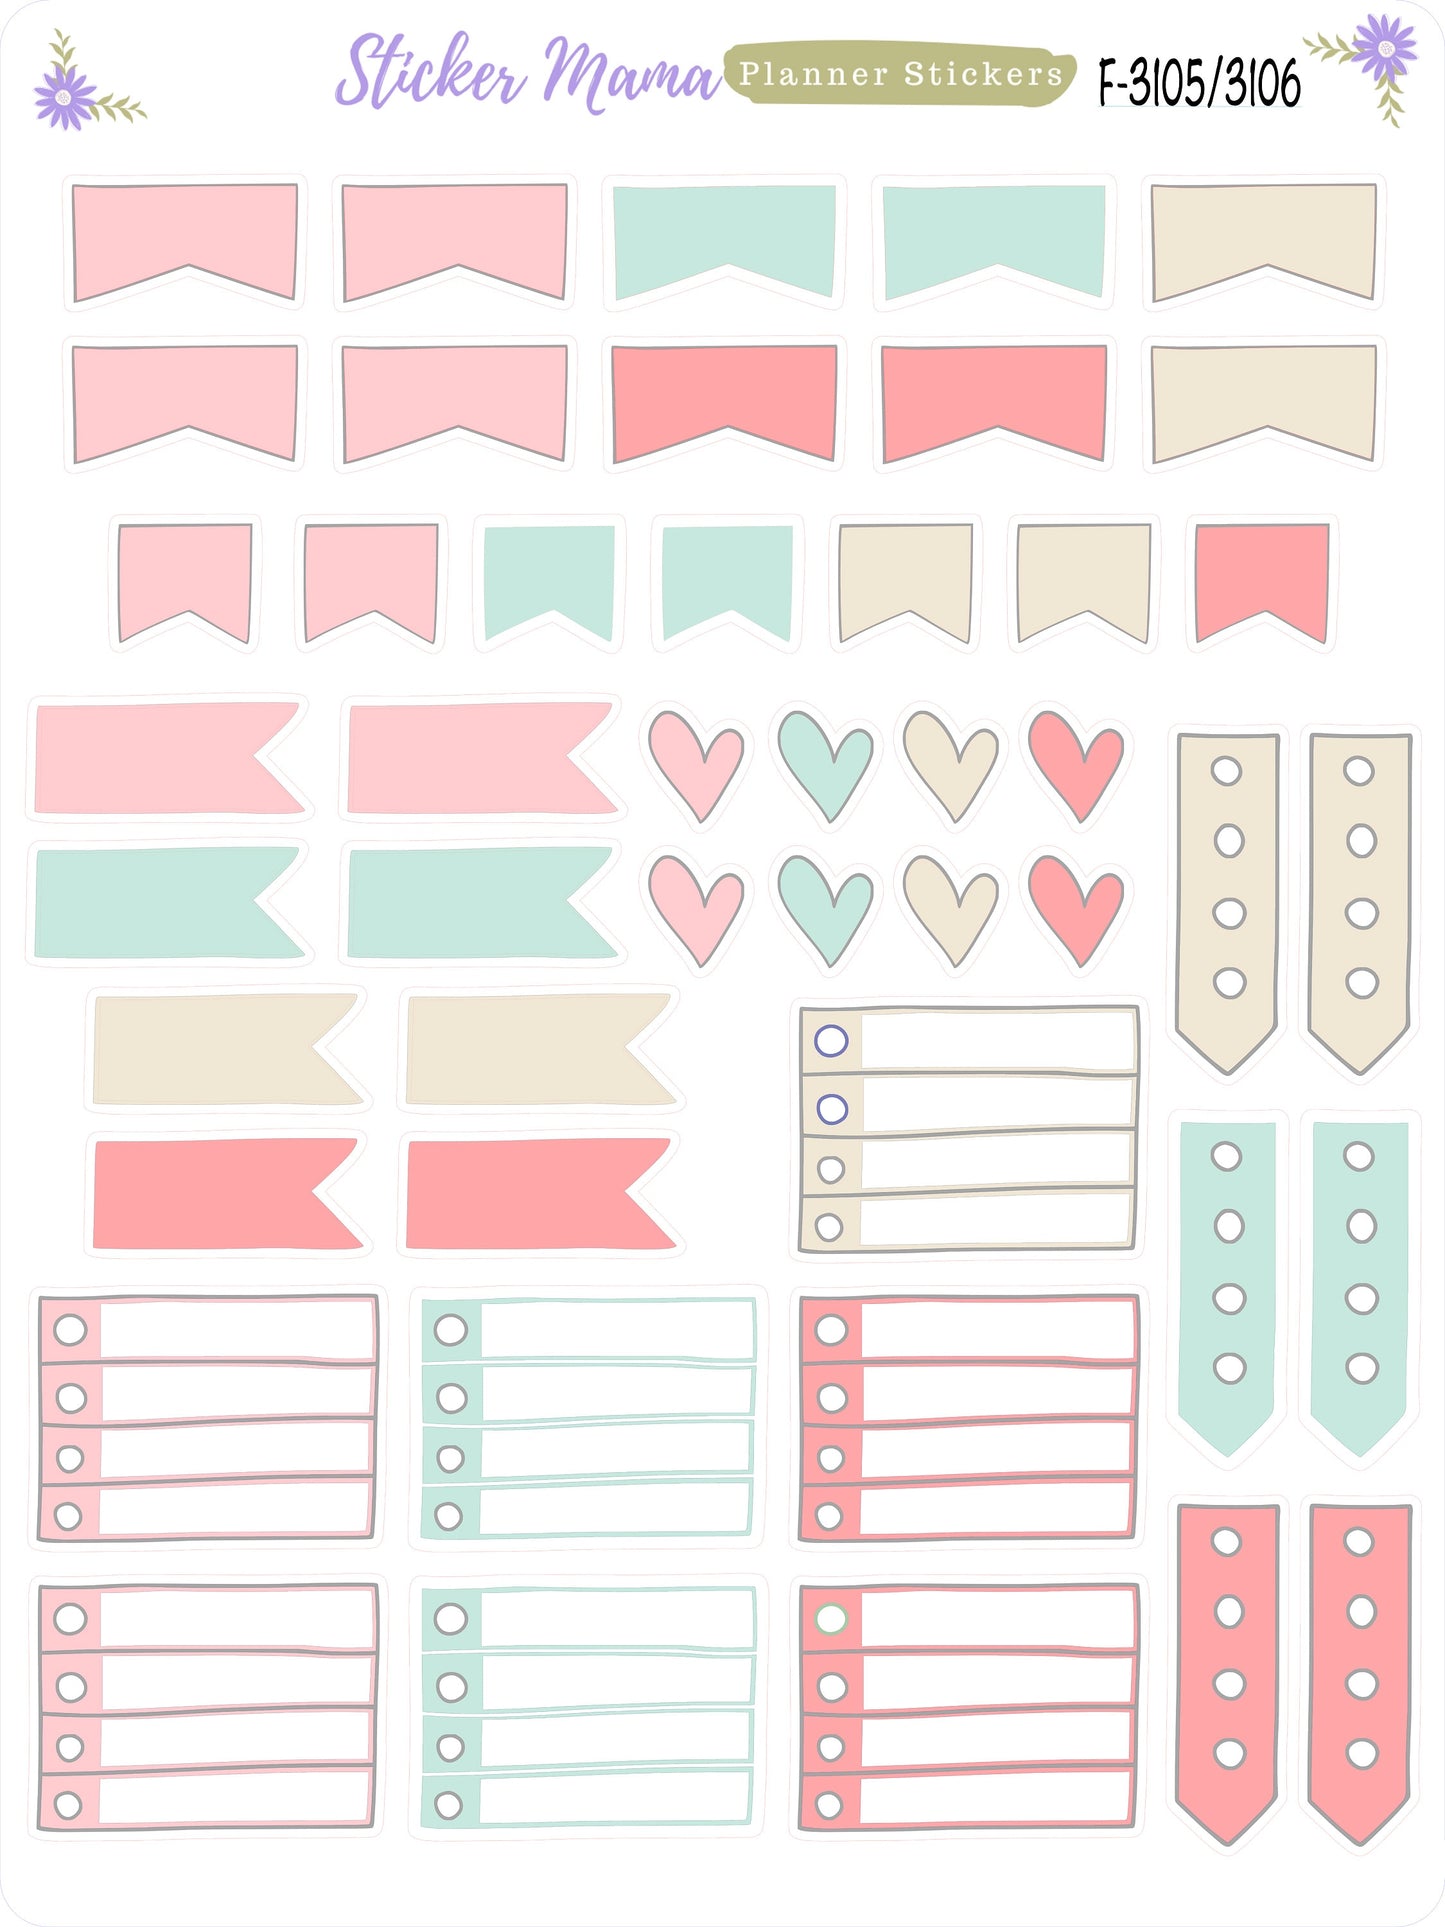 SIMPLE KIT  || #3106 || Hello, Plaid! || Any Kind Planner || Planner Stickers || Planner Stickers